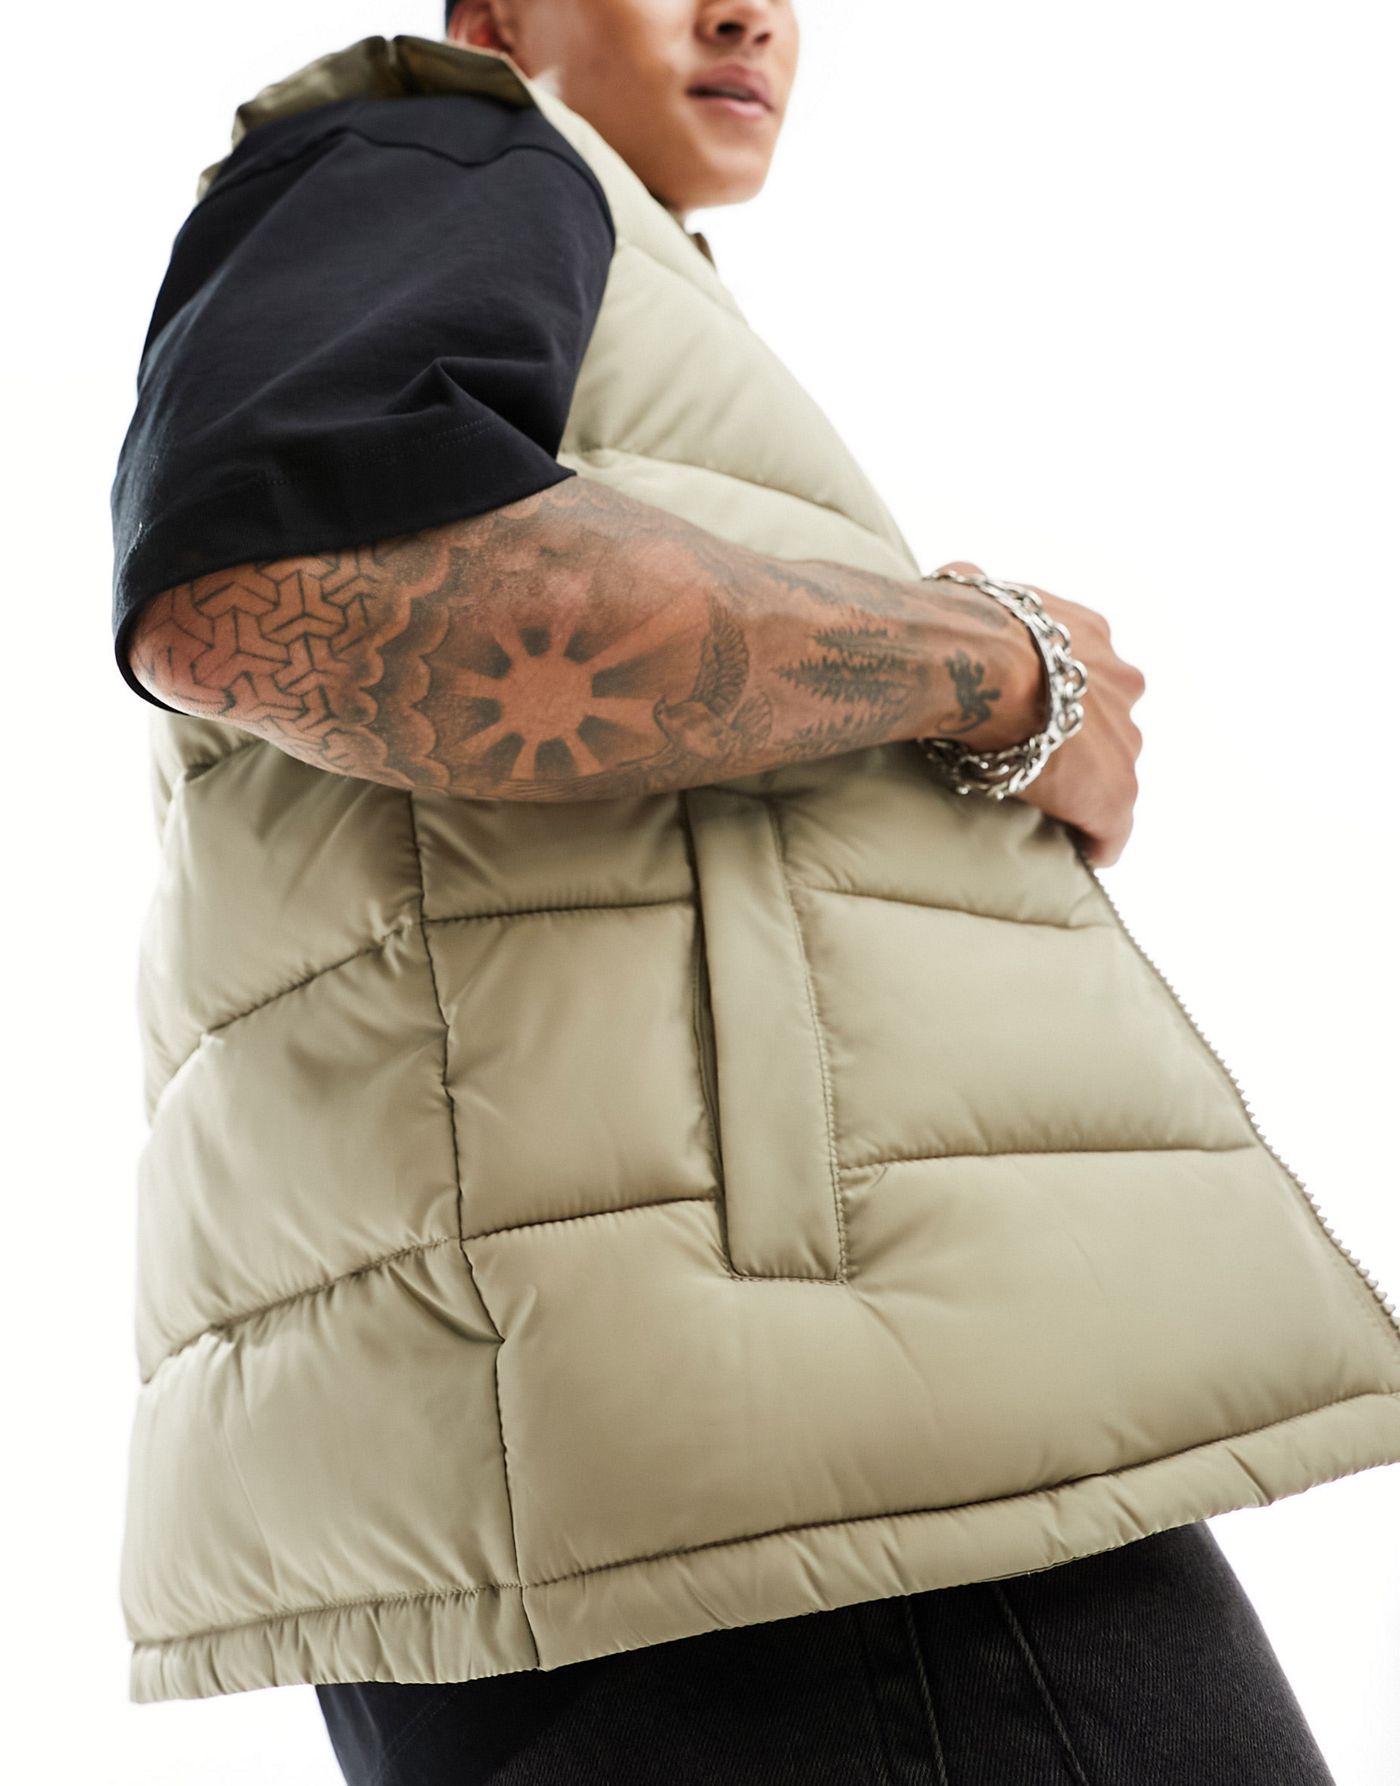 New Look padded gilet in stone